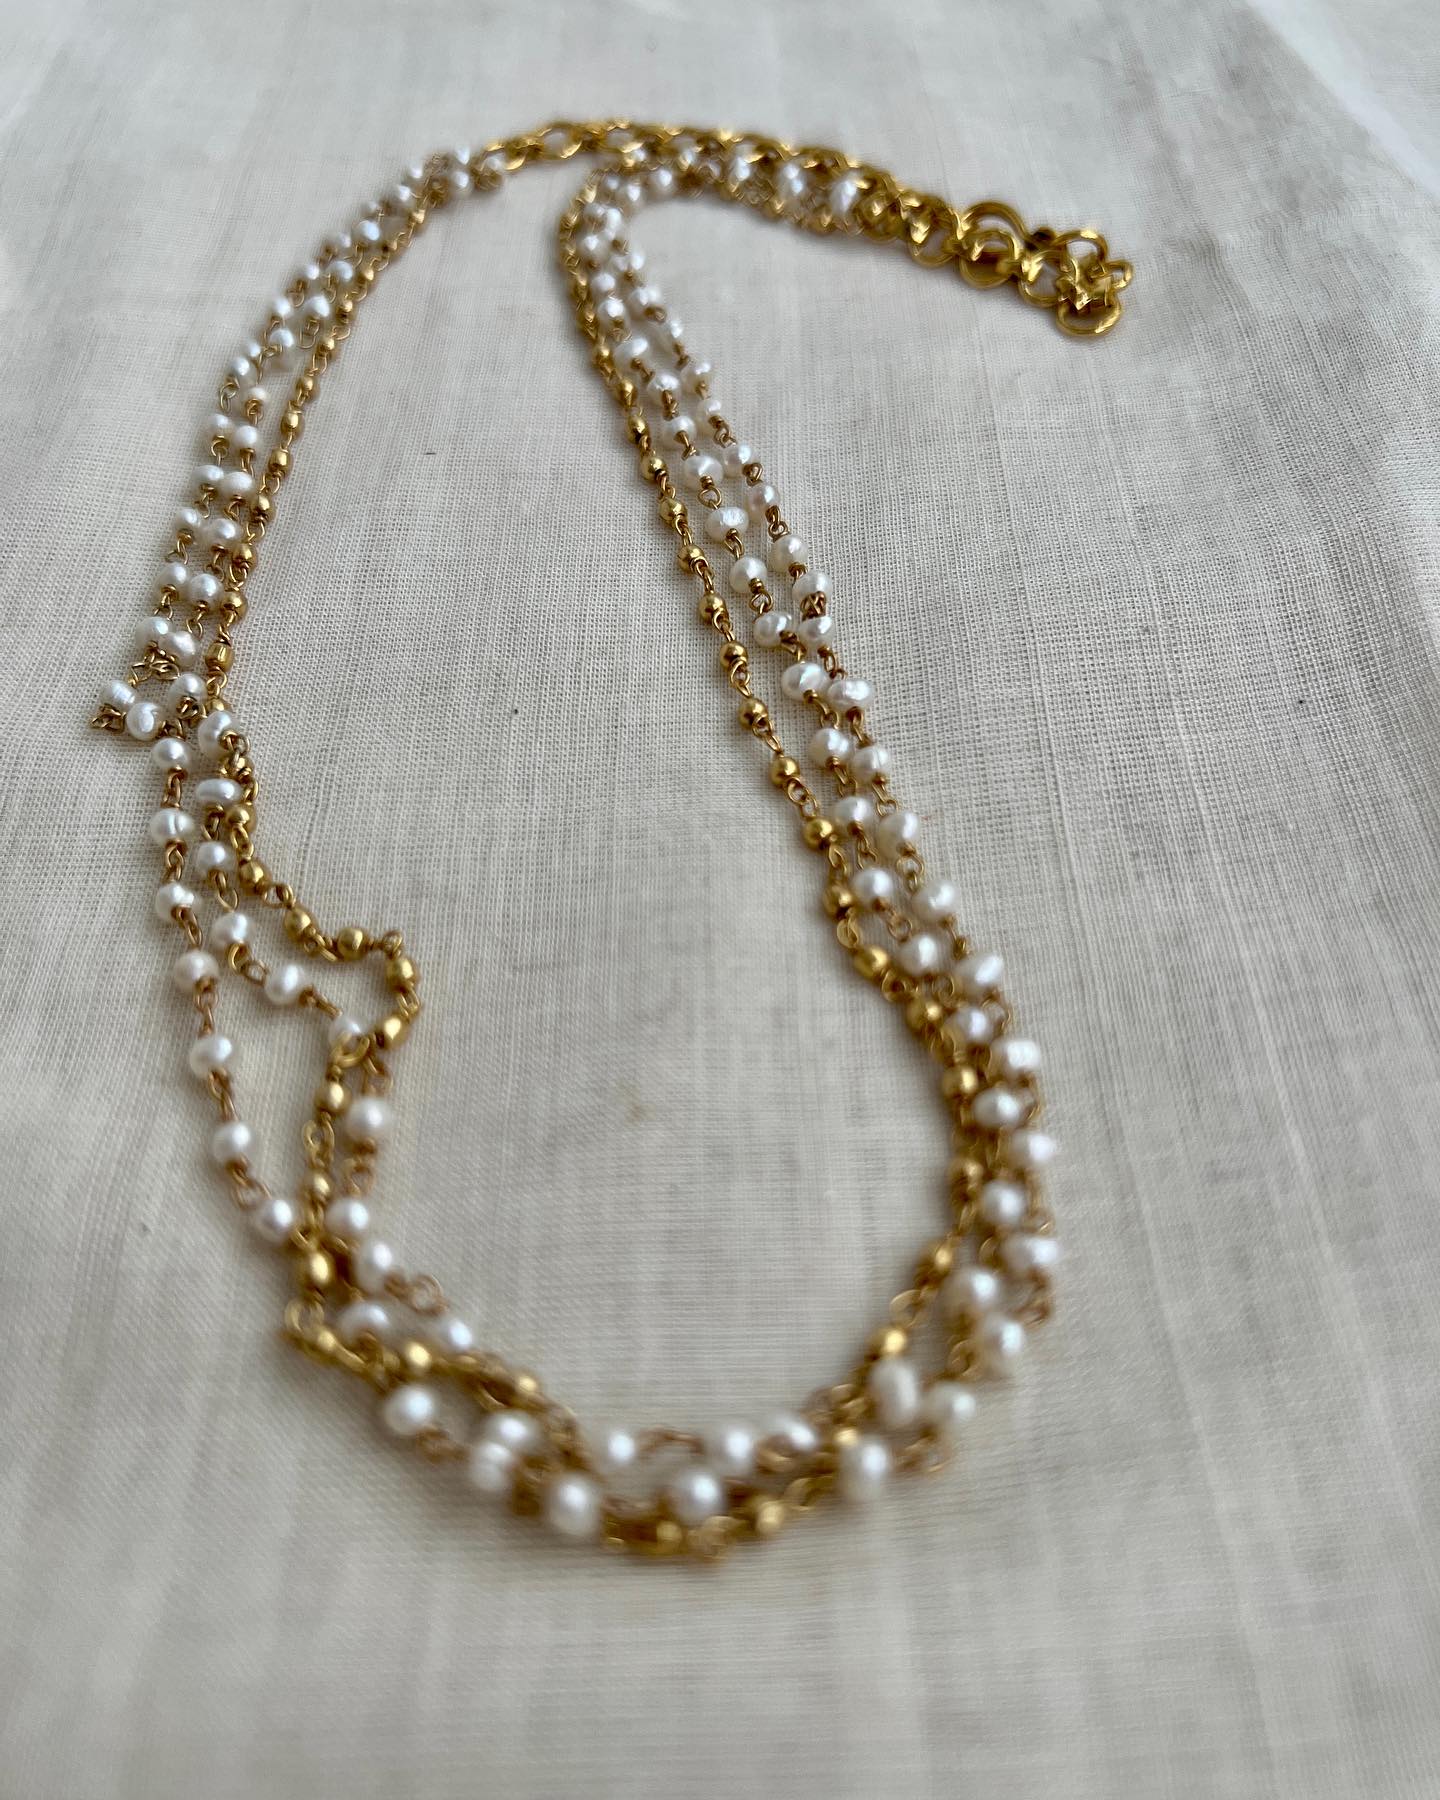 Gold Plated Silver Beaded Chains From 'House of Taamara